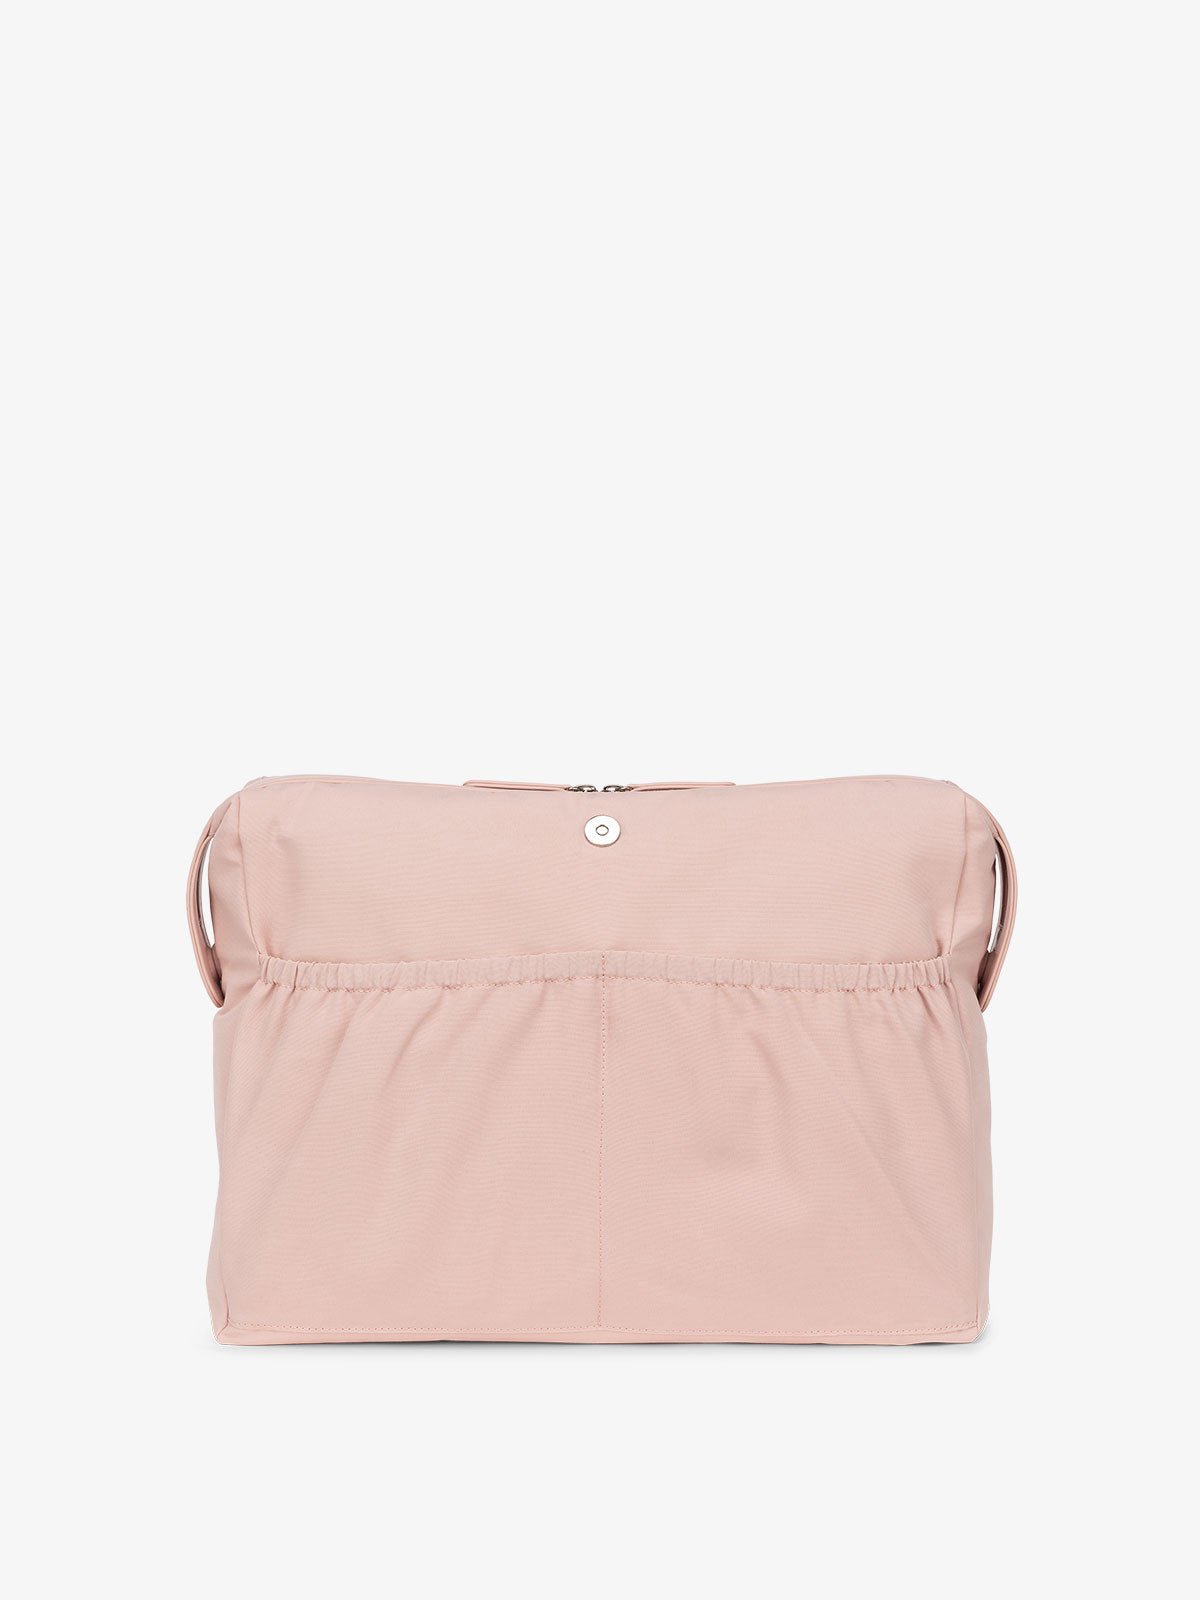 Haven tote bag with laptop sleeve in pink petal